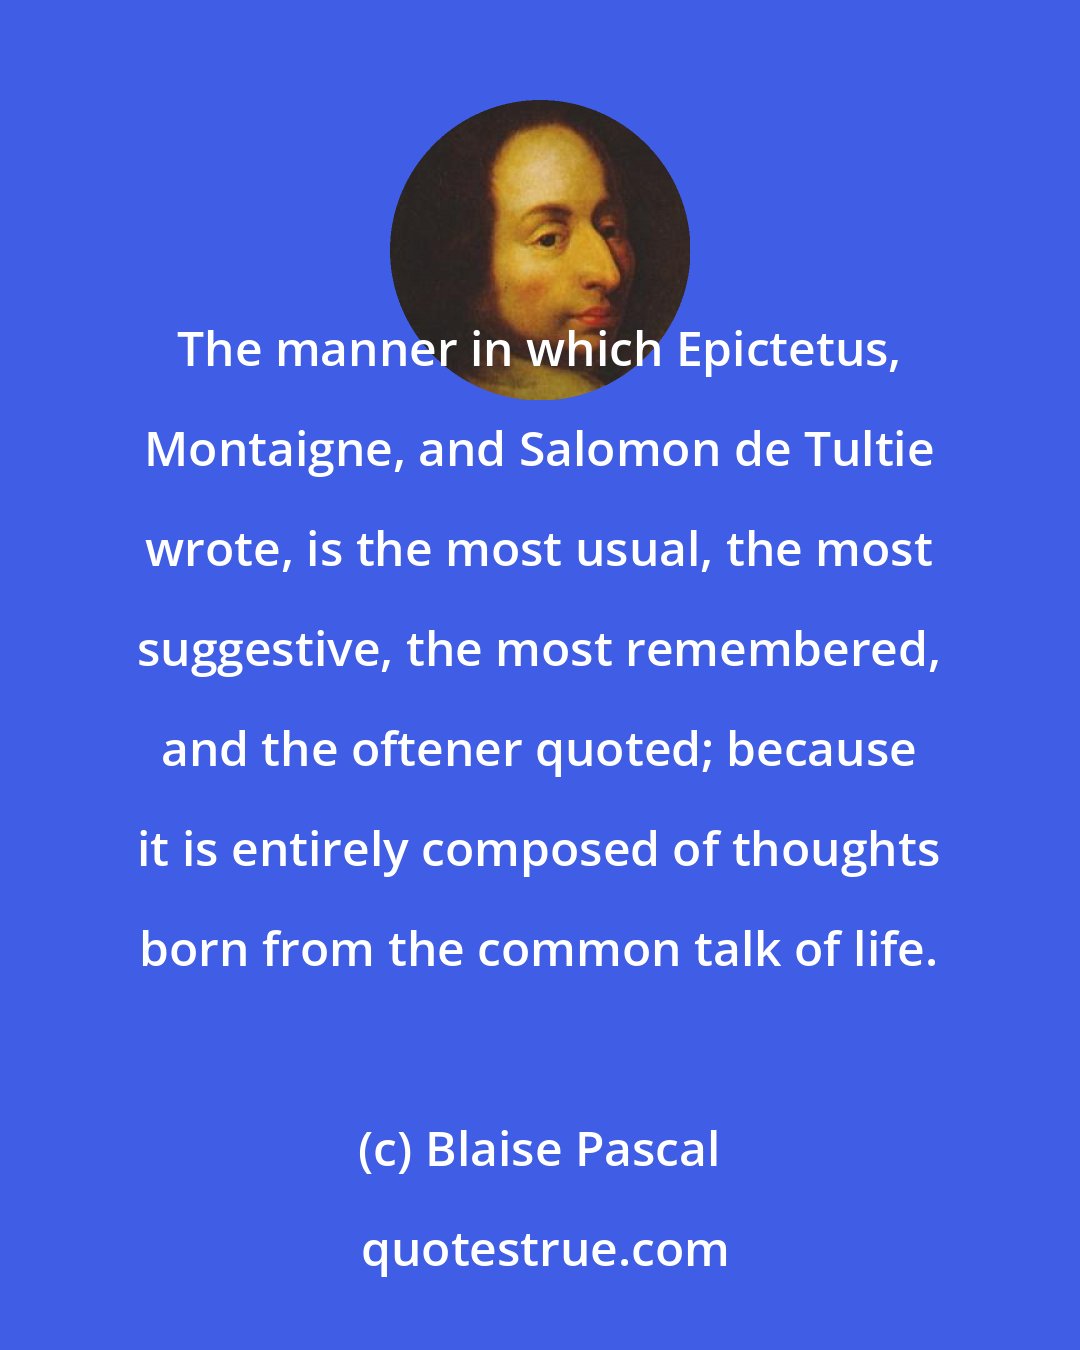 Blaise Pascal: The manner in which Epictetus, Montaigne, and Salomon de Tultie wrote, is the most usual, the most suggestive, the most remembered, and the oftener quoted; because it is entirely composed of thoughts born from the common talk of life.